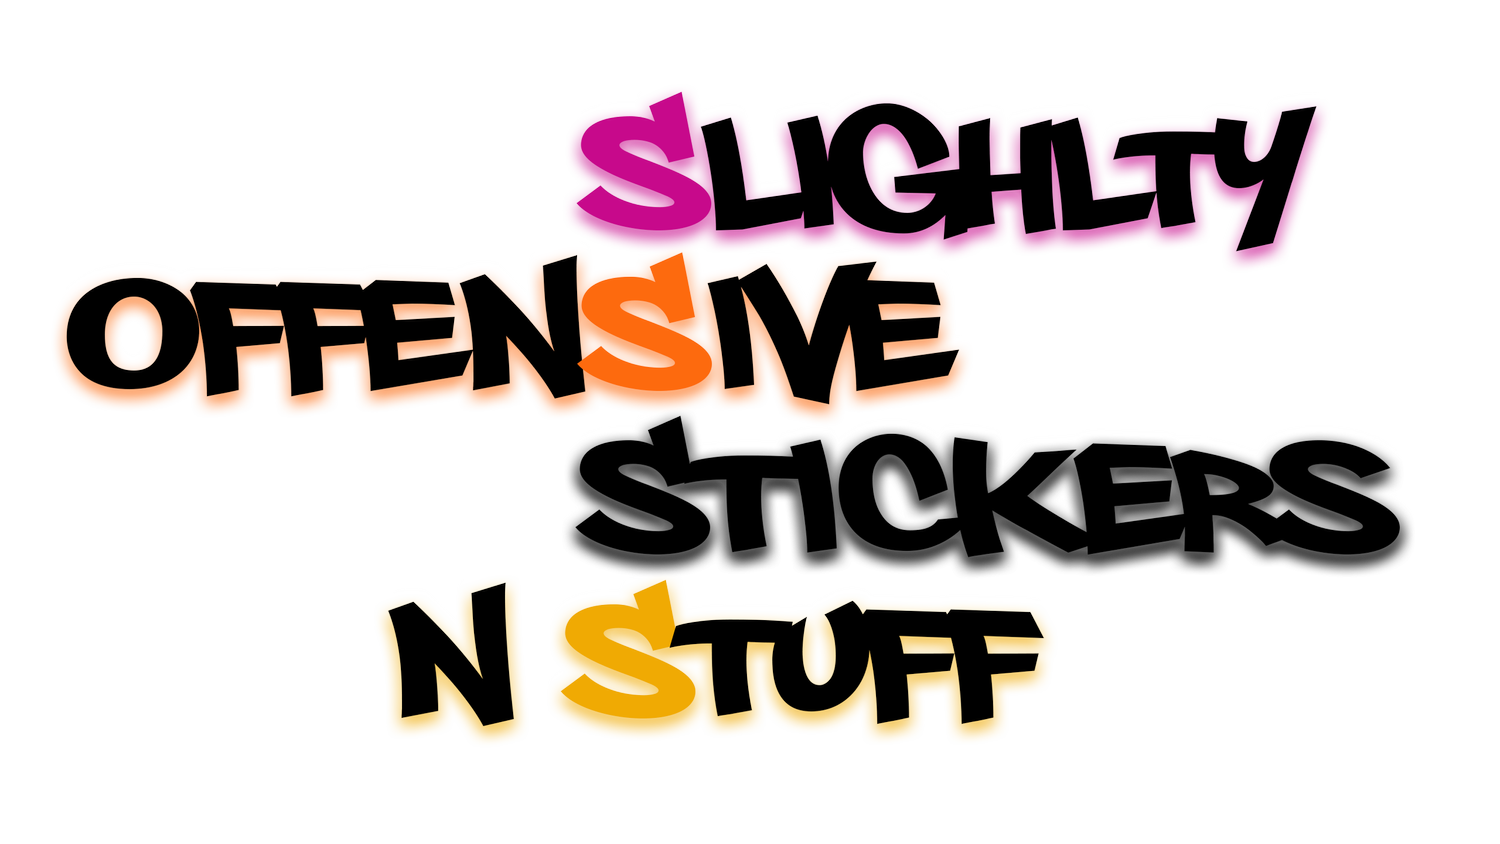 Slightly Offensive Stickers N Stuff